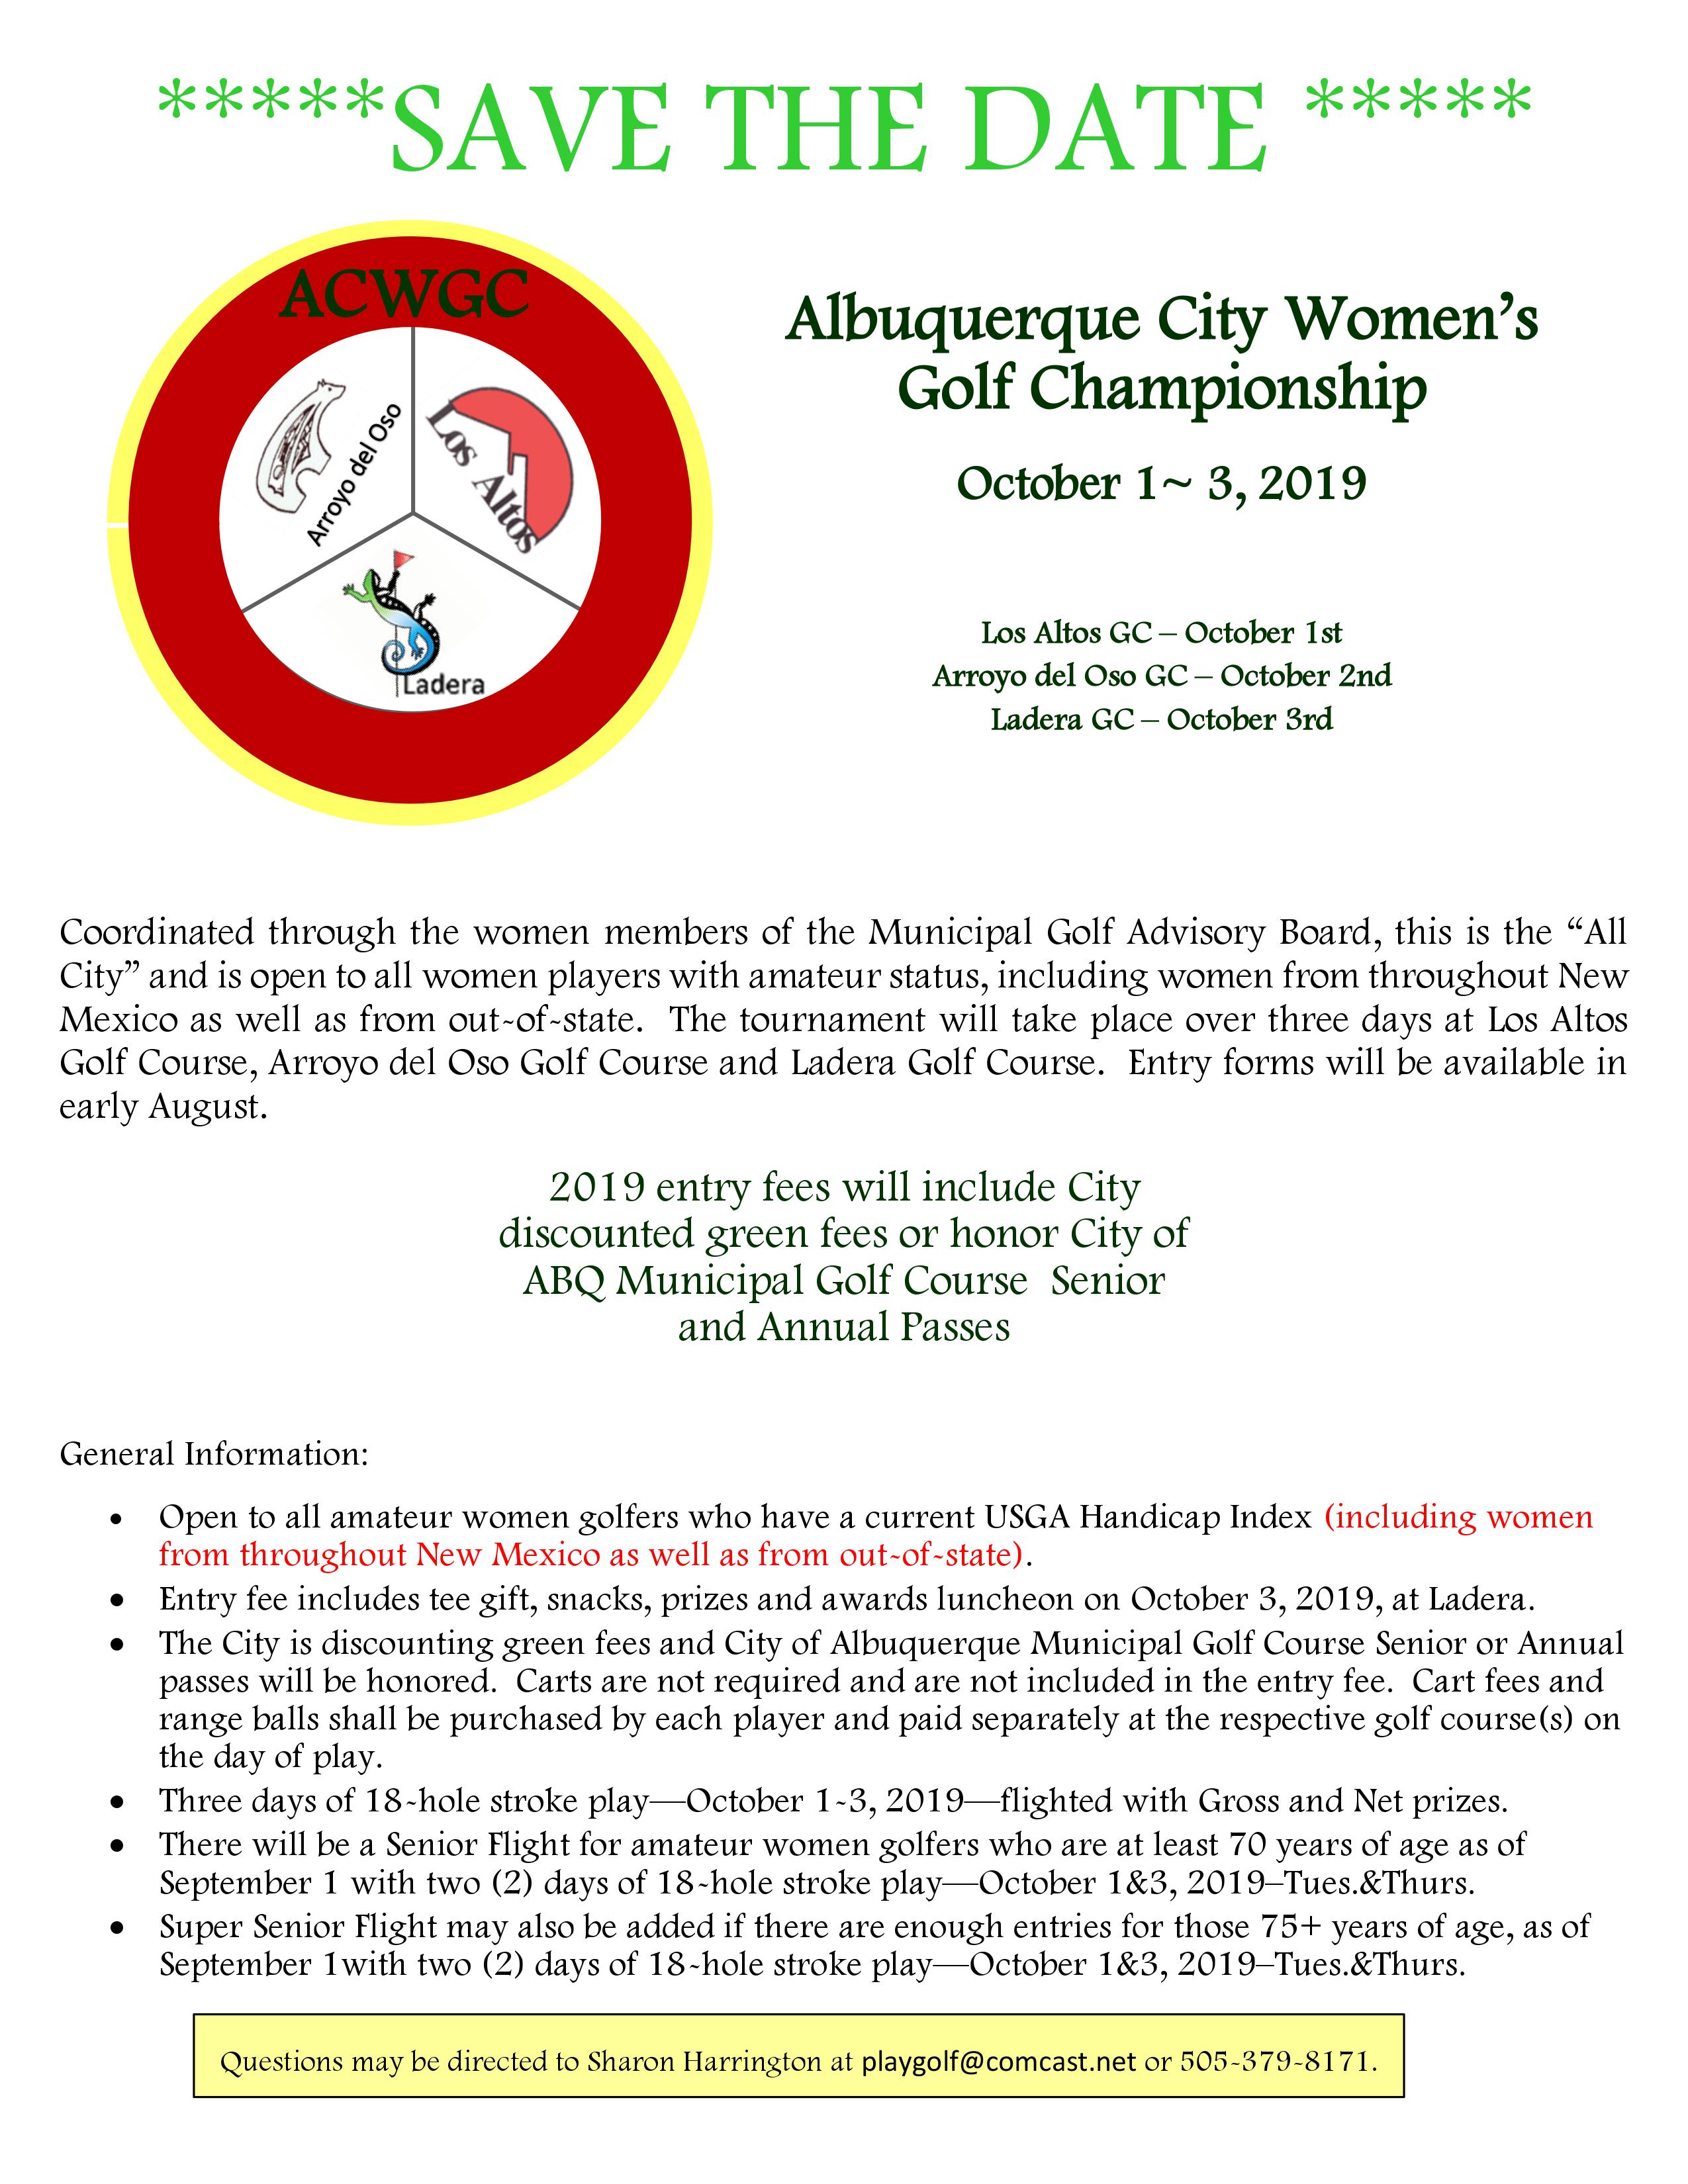 2019 ACWGC Save the Date Flyer